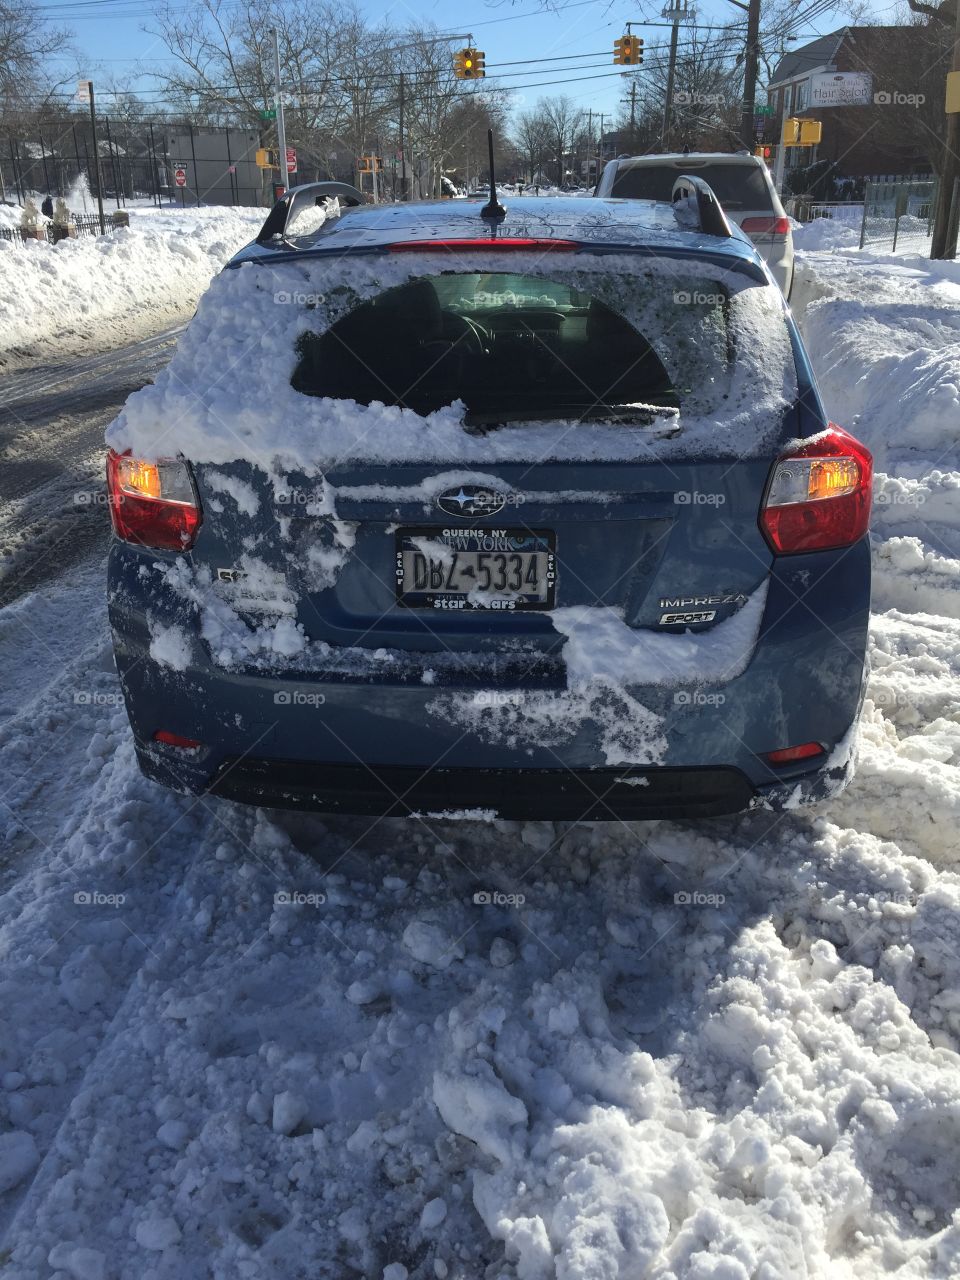 Subaru made it out of the snow no problem